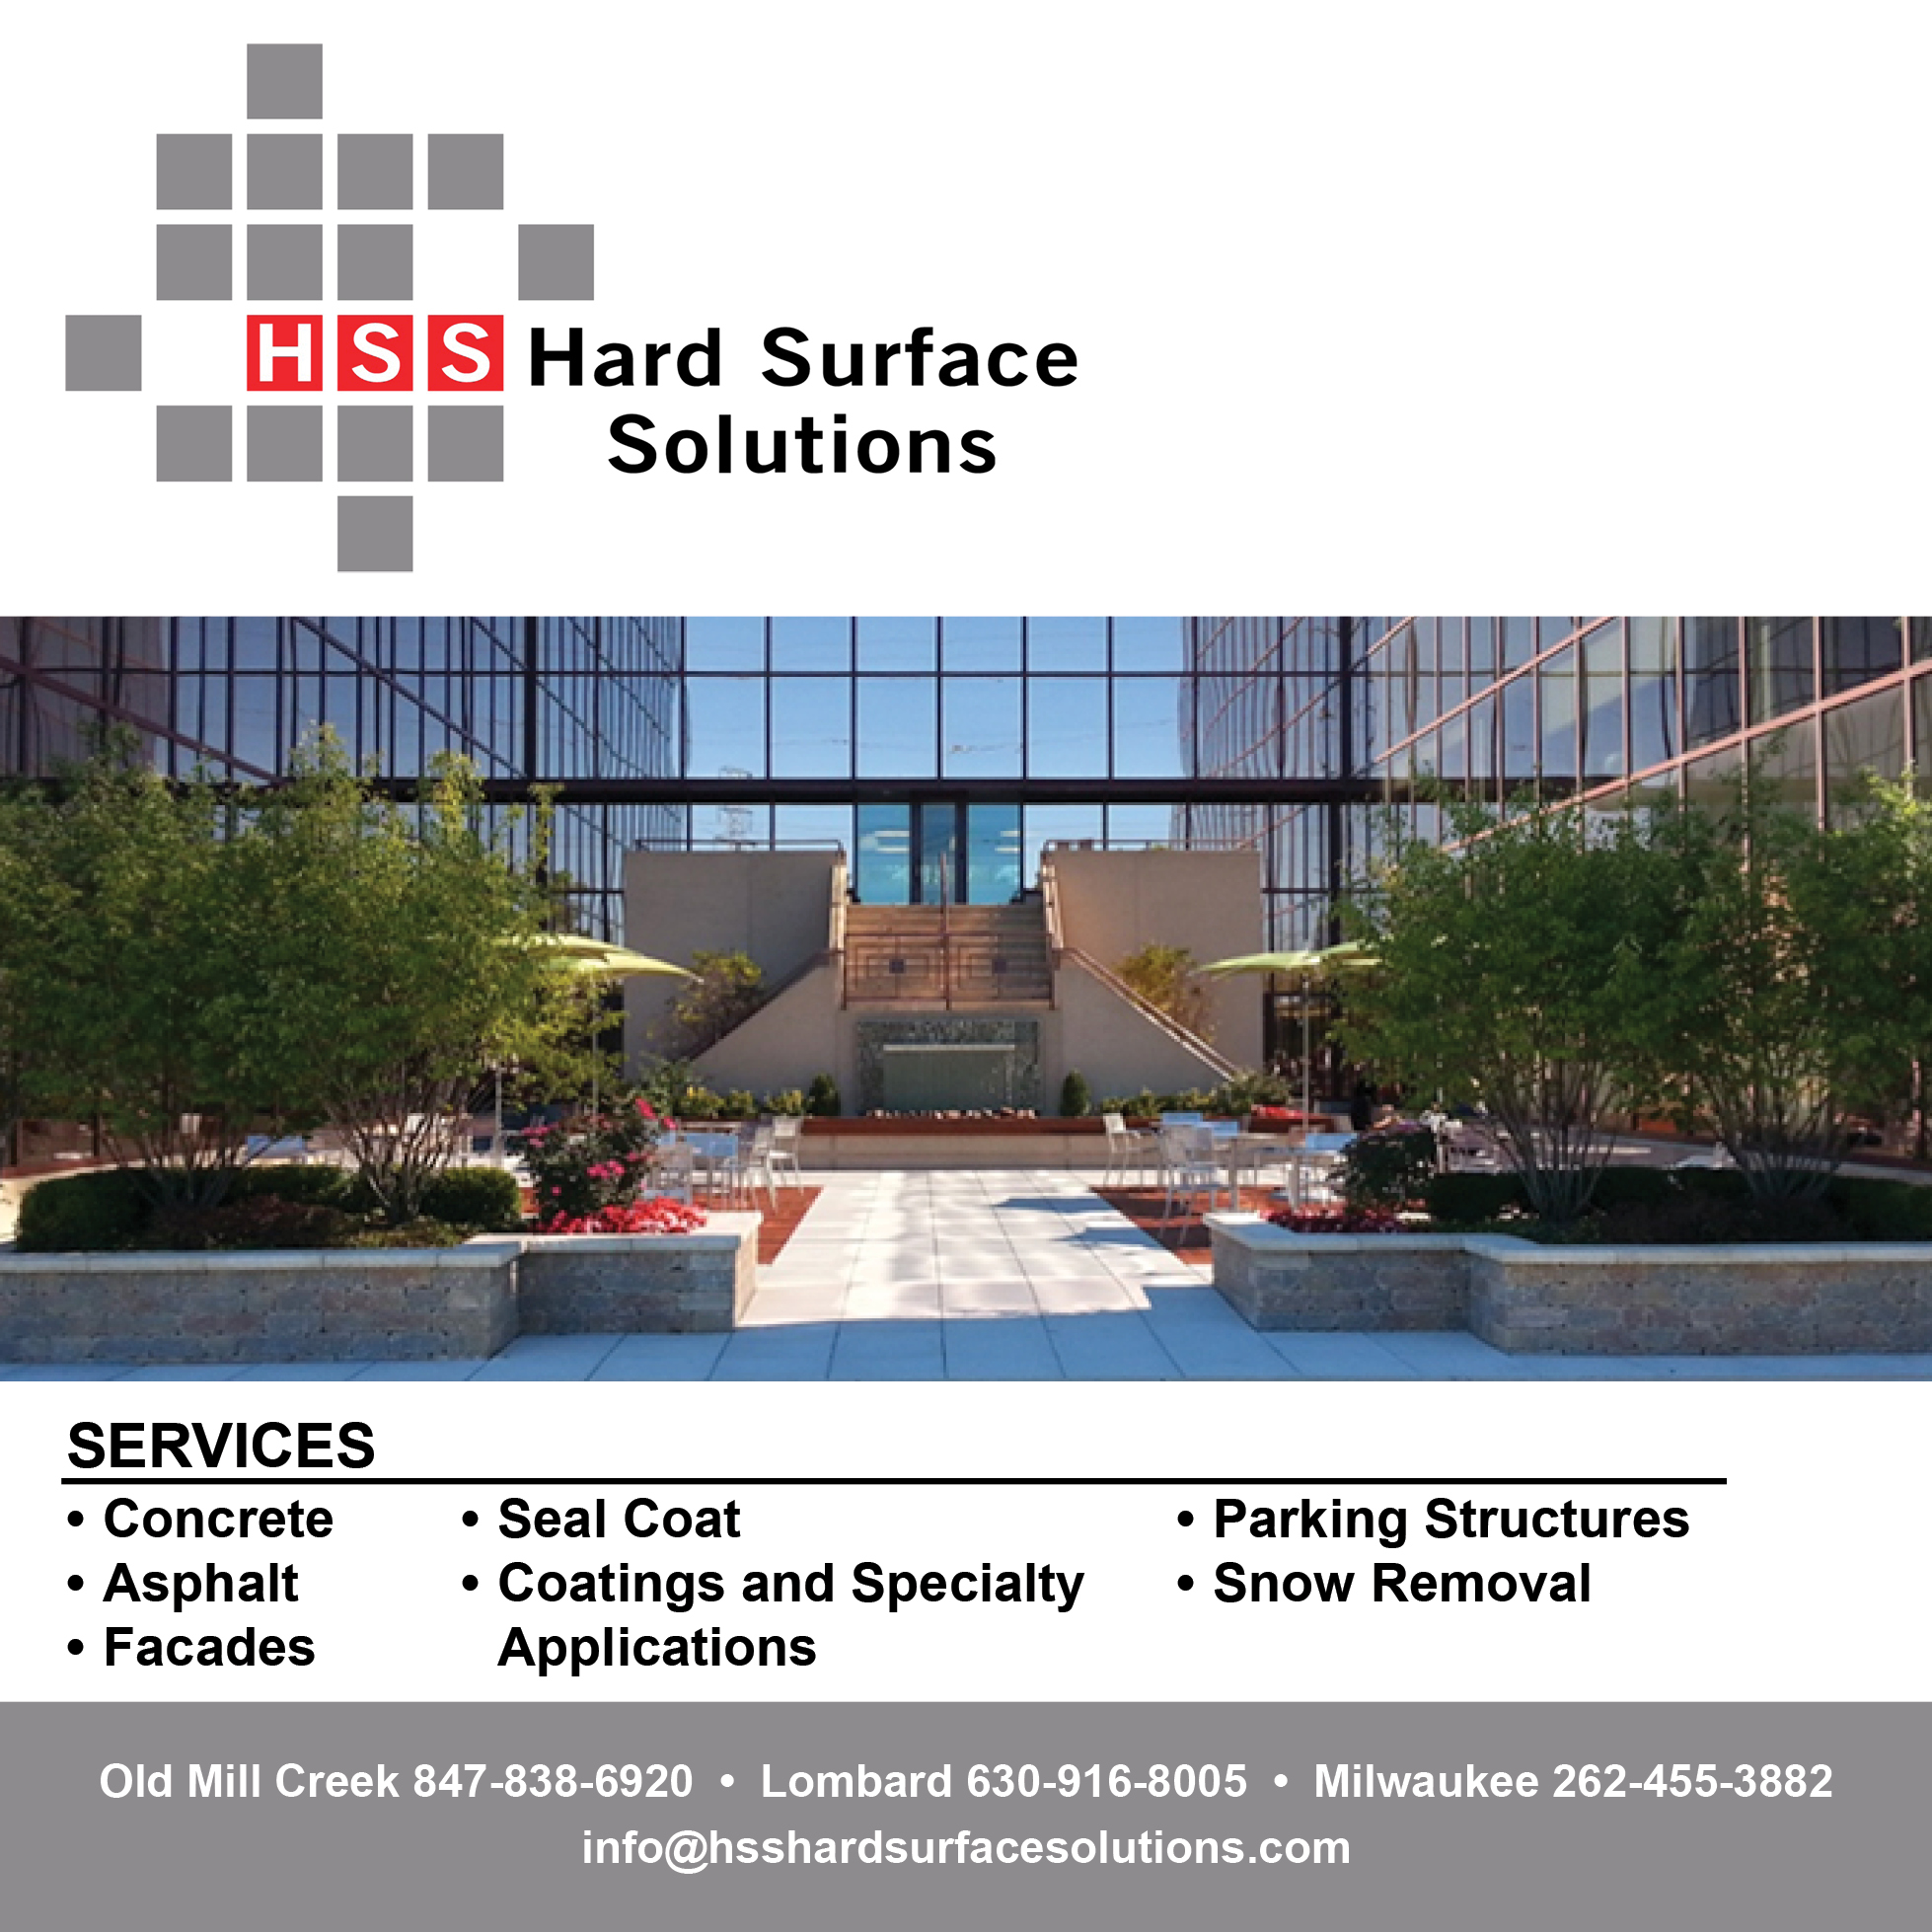 Hard Surface Solutions, Inc. is a regional contractor focused on commercial clientele. 3 locations, Lombard, IL, Old Mill Creek, IL, Milwaukee, WI. This includes Industrial, Medical Office, Municipal, Retail, HOA’s and Commercial Facilities. We are dedicated to exceeding our clients’ expectations by providing professional and reliable maintenance and repairs. With Hard Surface Solutions on your team, you will receive repair recommendations, maintenance considerations, 3-5 year budget recommendations and communication that will allow minimal inconvenience to your tenants.